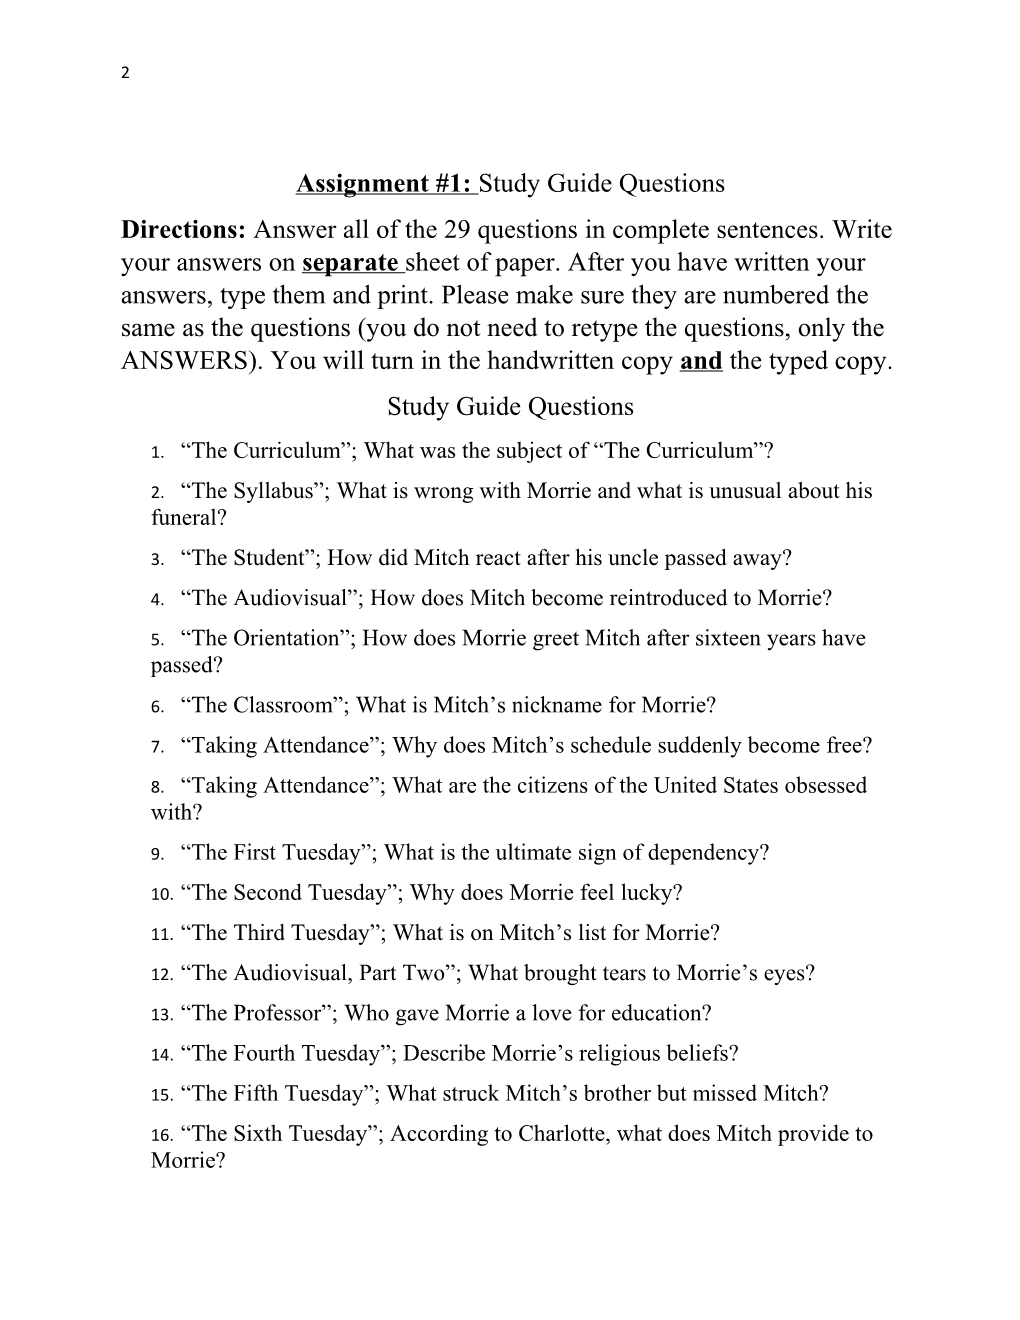 Assignment #1: Study Guide Questions DUE the First Day of School